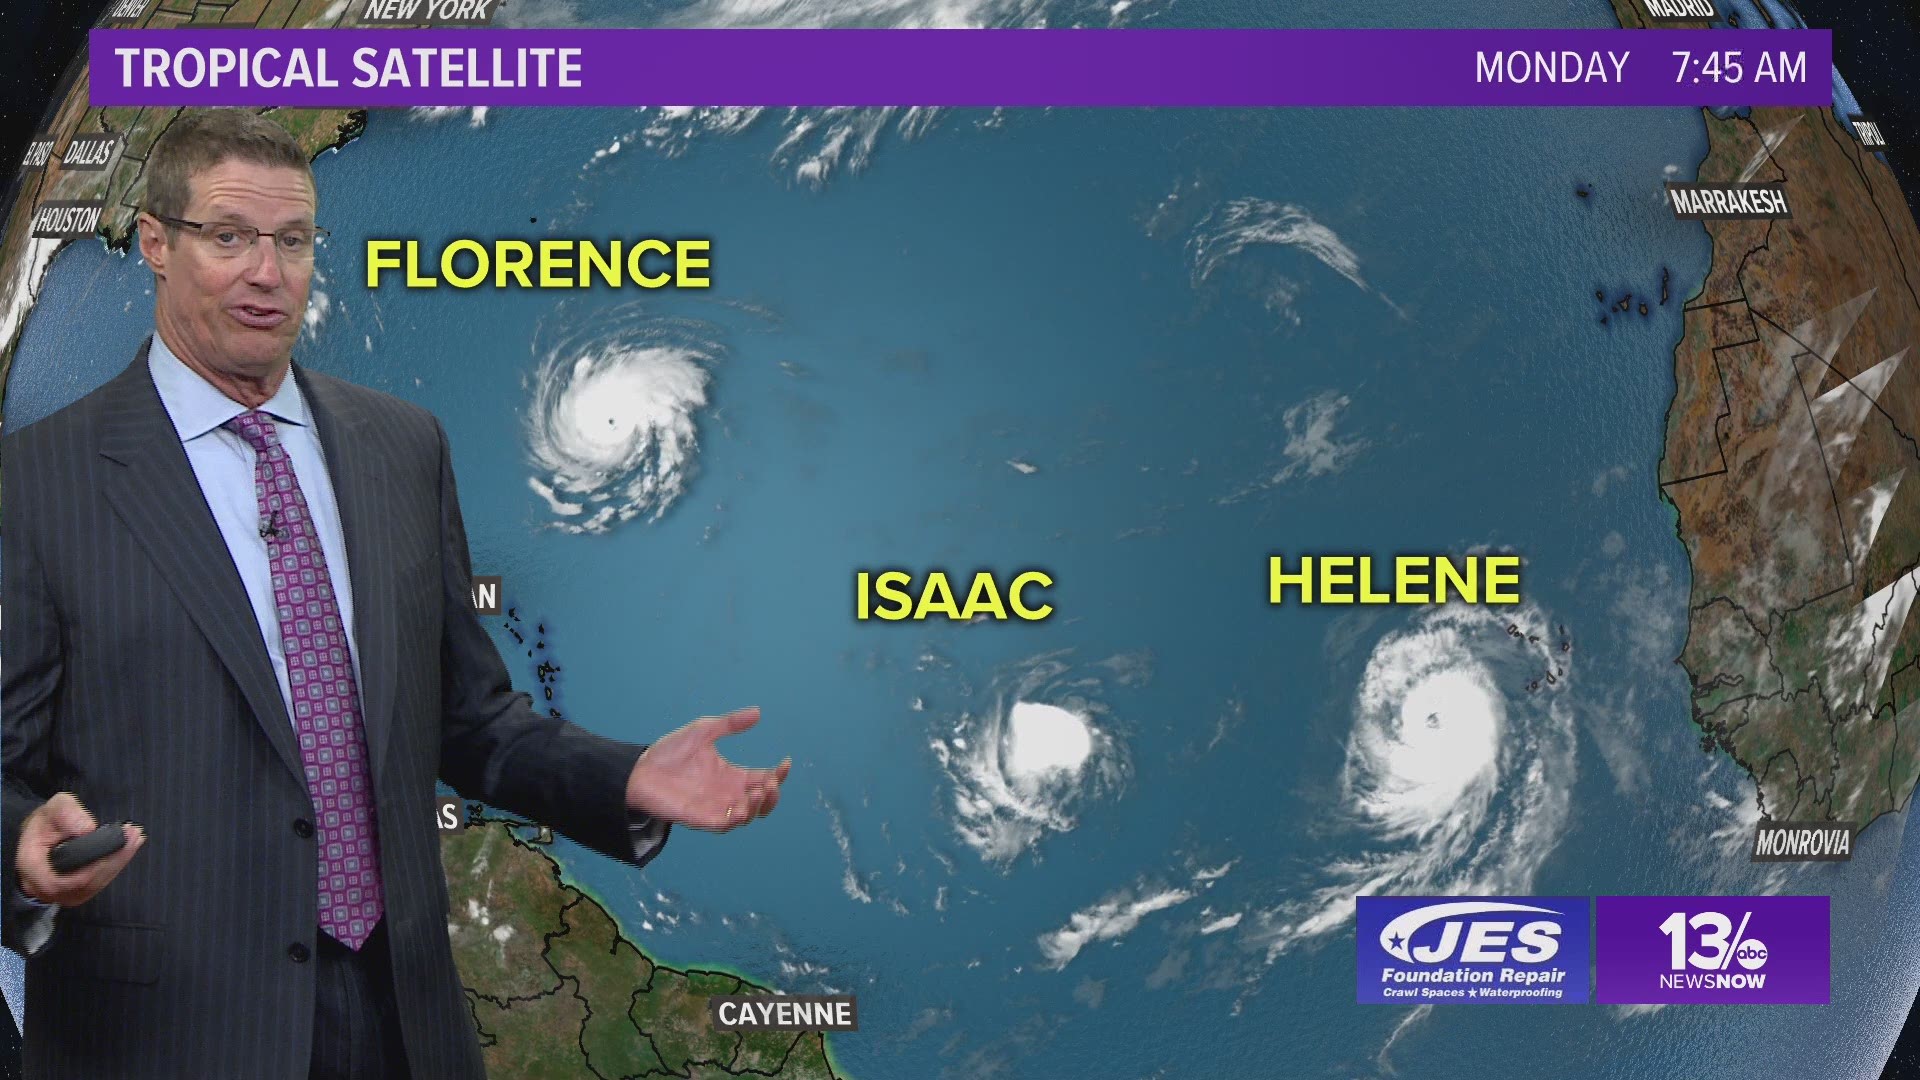 13News Now meteorologist Jeff Lawson takes a look at the latest projected forecast tracks for Hurricane Florence, now a powerful Category 4 storm heading toward the East  Coast.
Latest on Florence: http://13newsnow.tv/florence
13News Now's Hurricane Cen